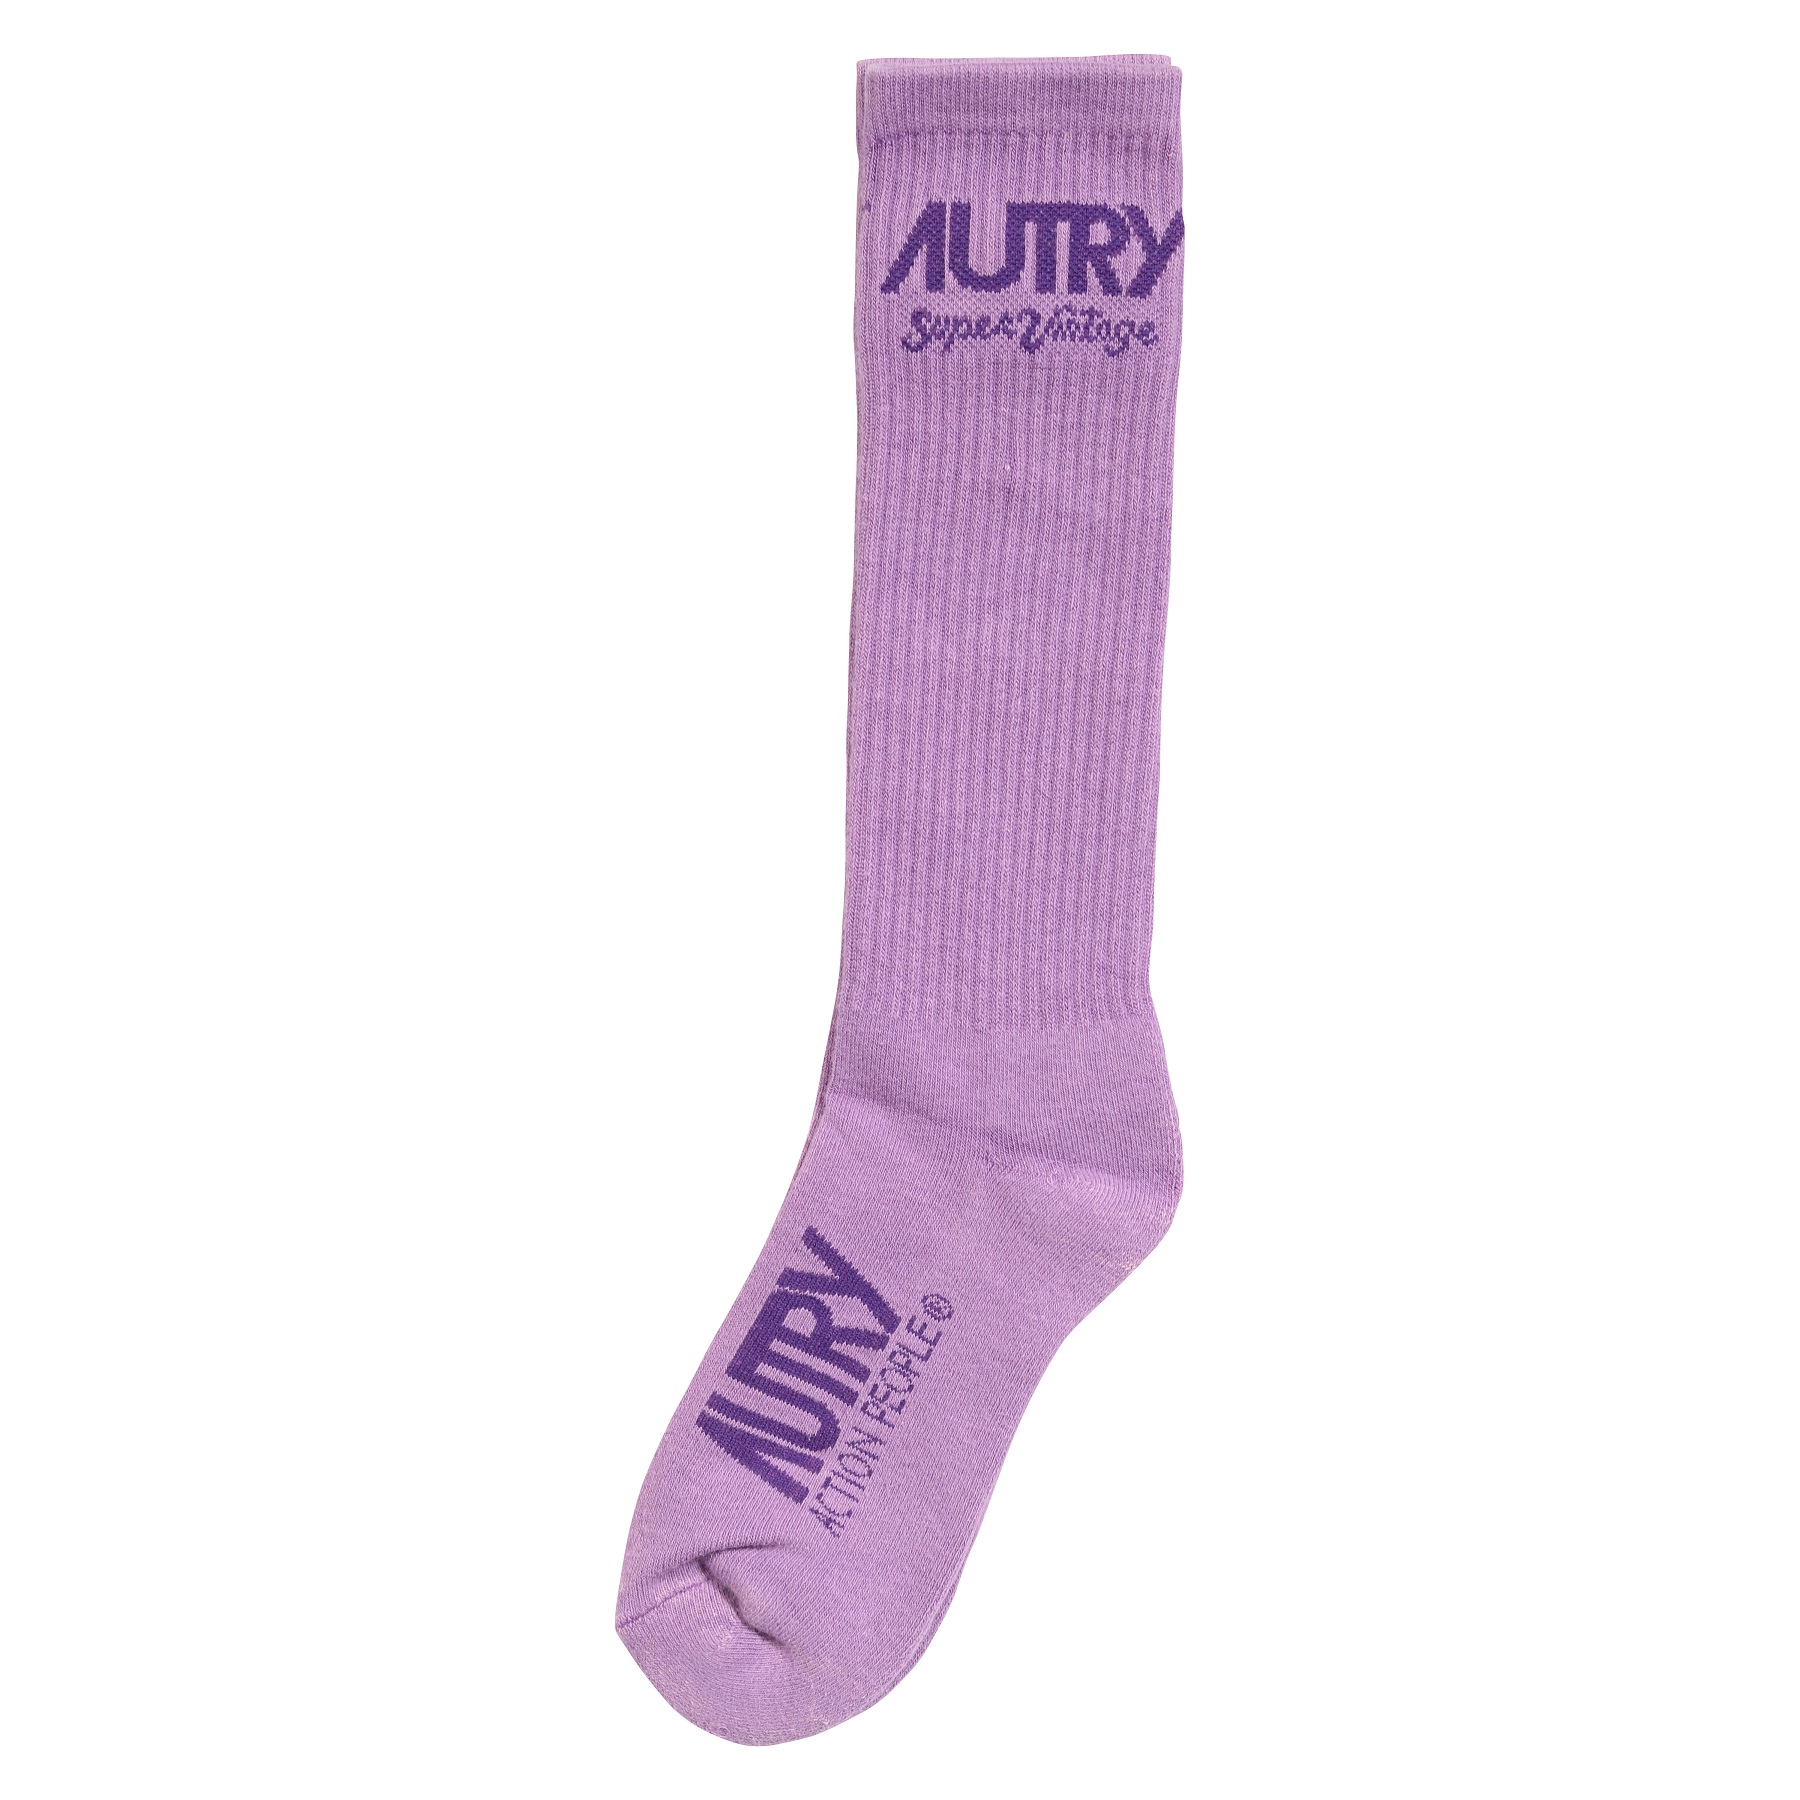 AUTRY ACTION SHOES Socks Supervintage Tinto Lilac